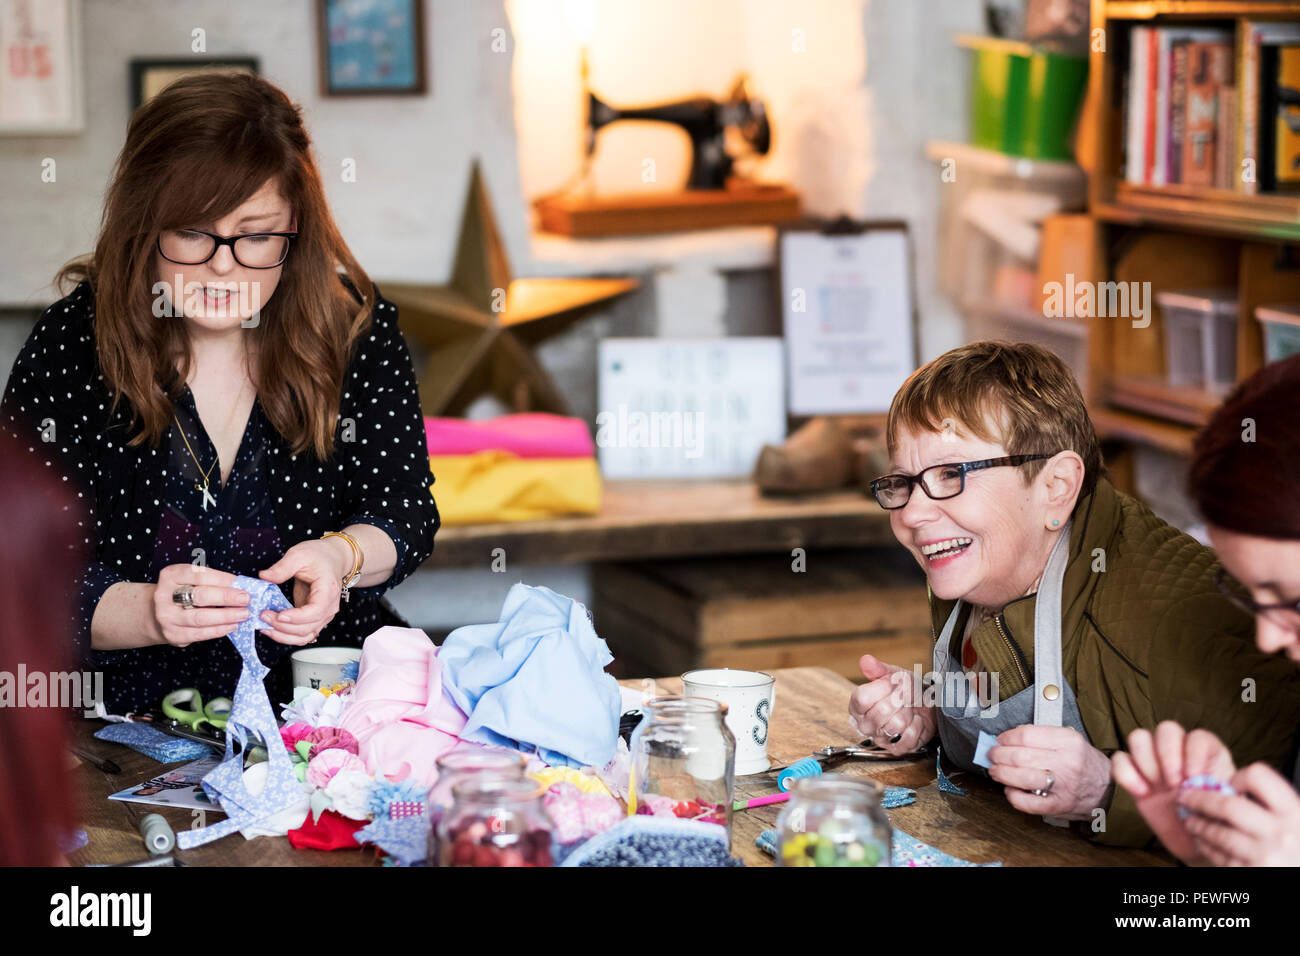 Two women sitting at a table in a workshop, making fabric flowers. Stock Photo